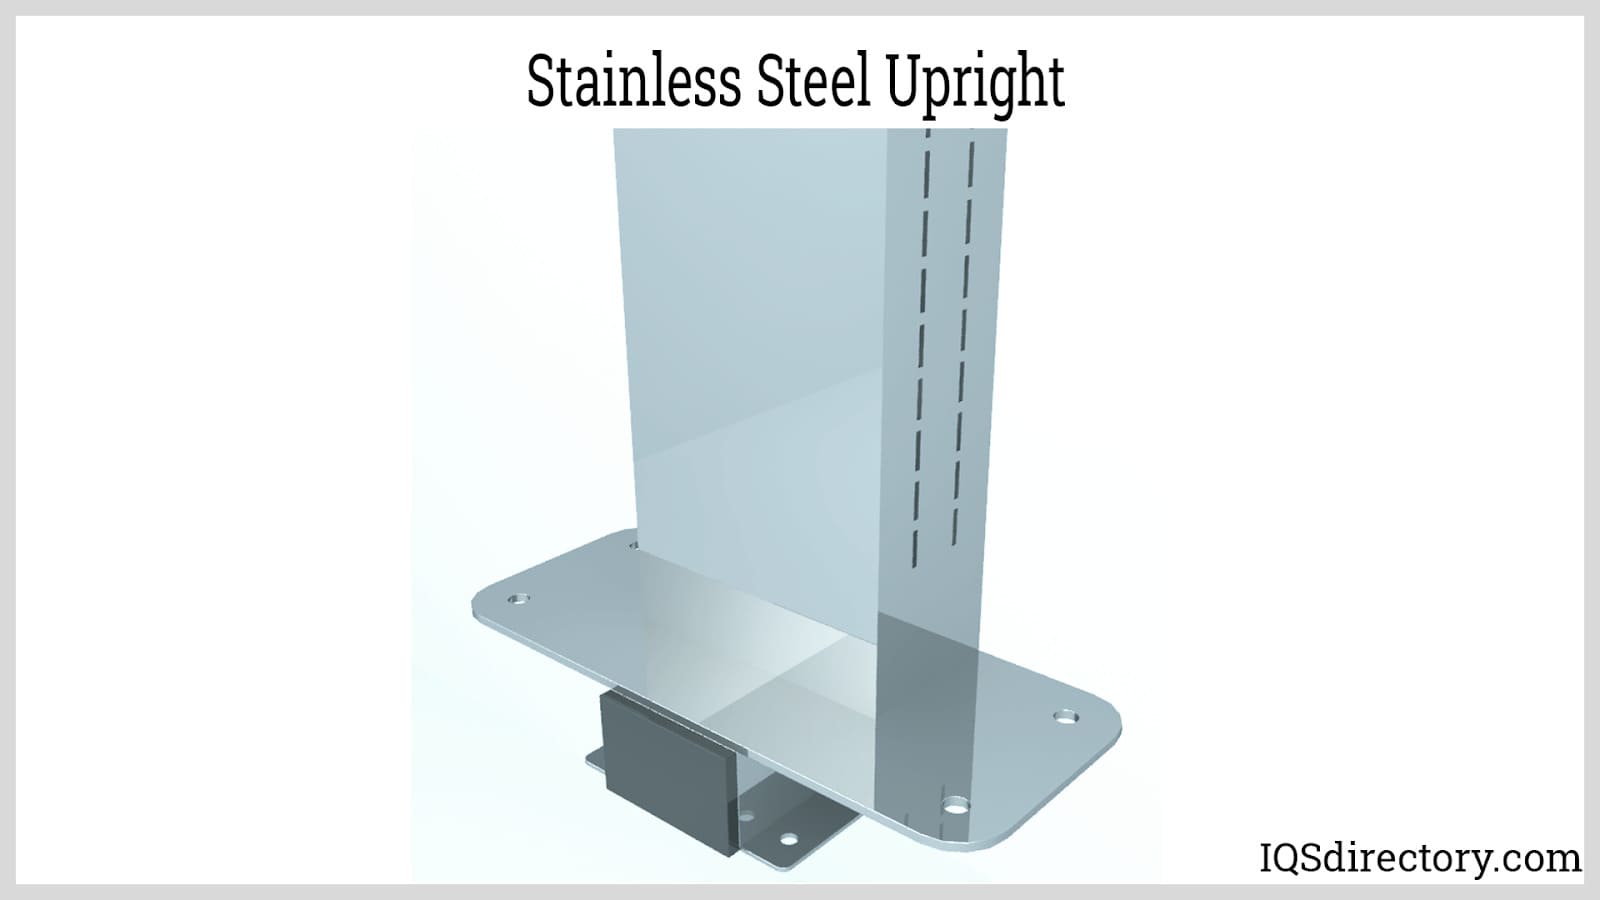 Stainless Steel Upright